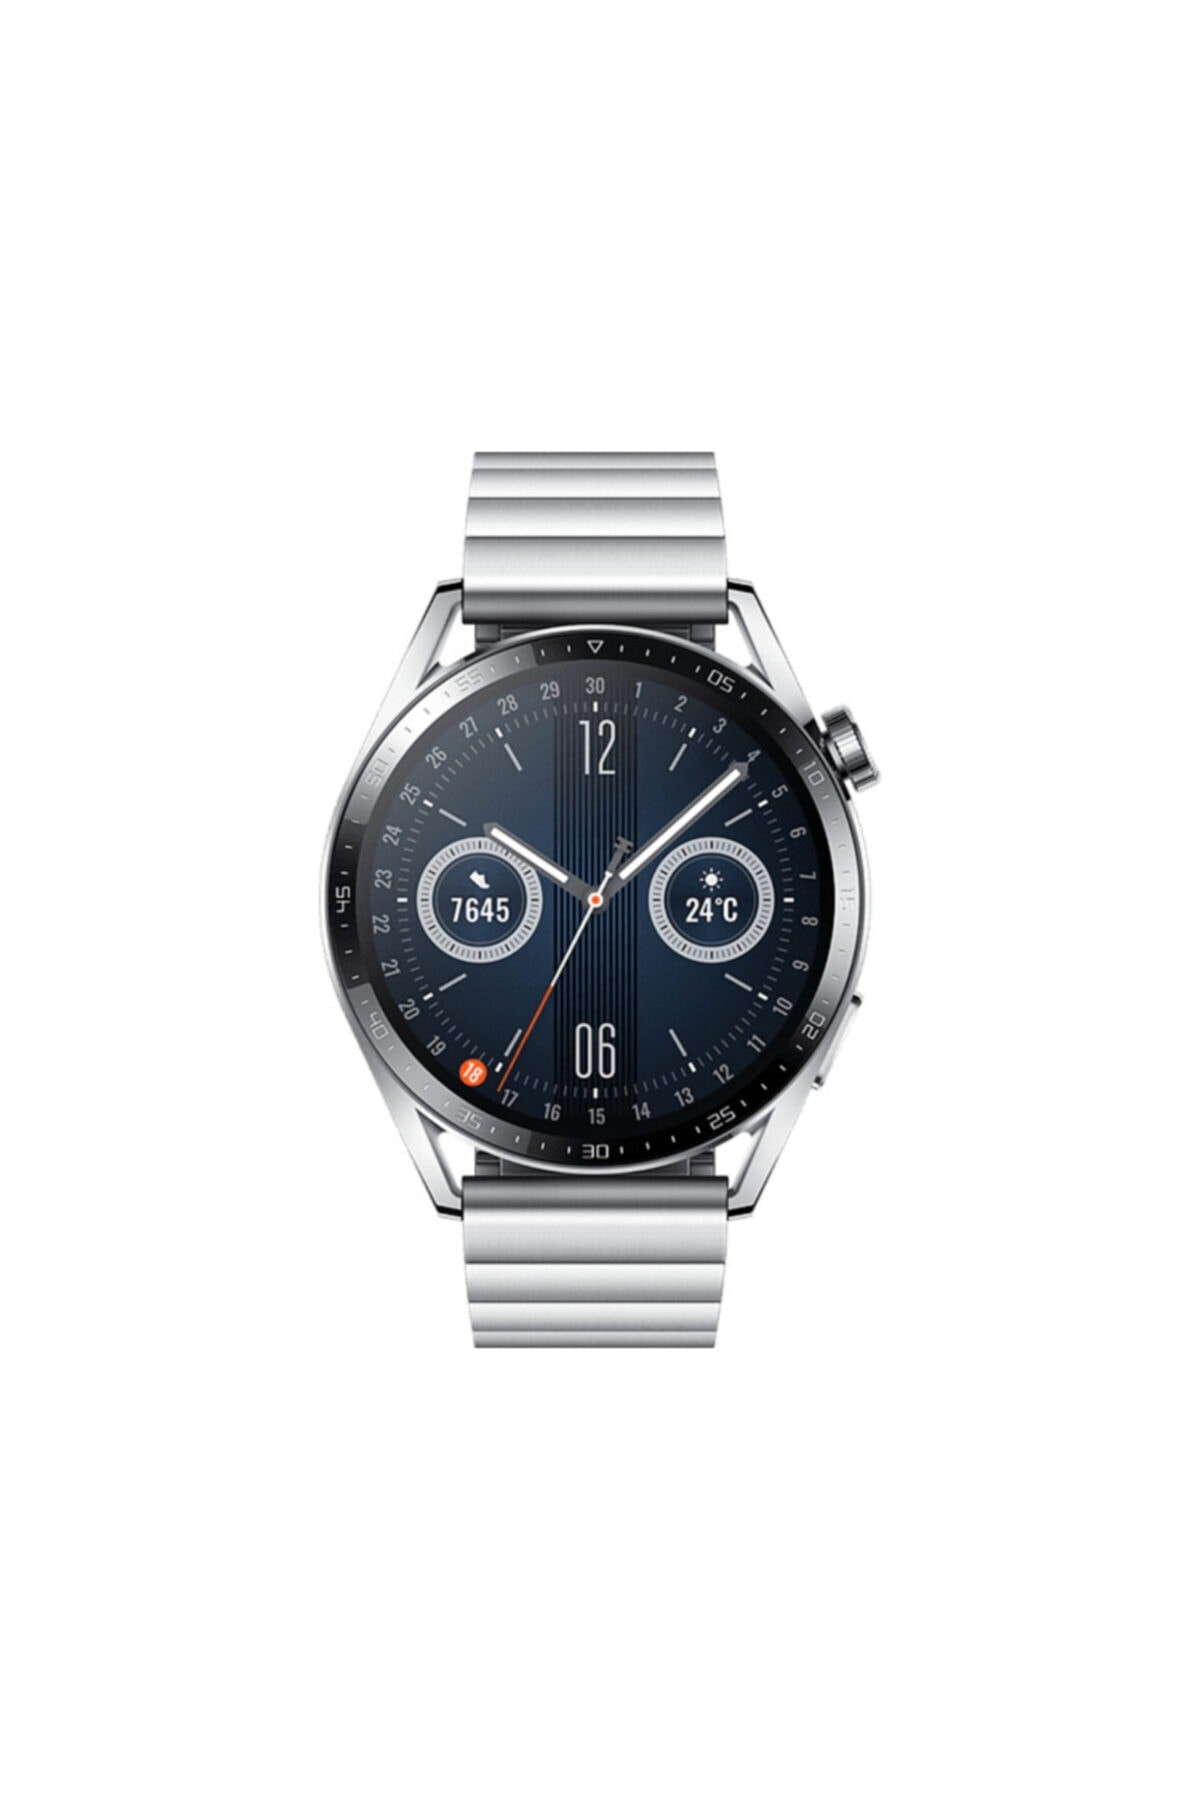 Huawei Watch GT 3 Elite offers the best battery life